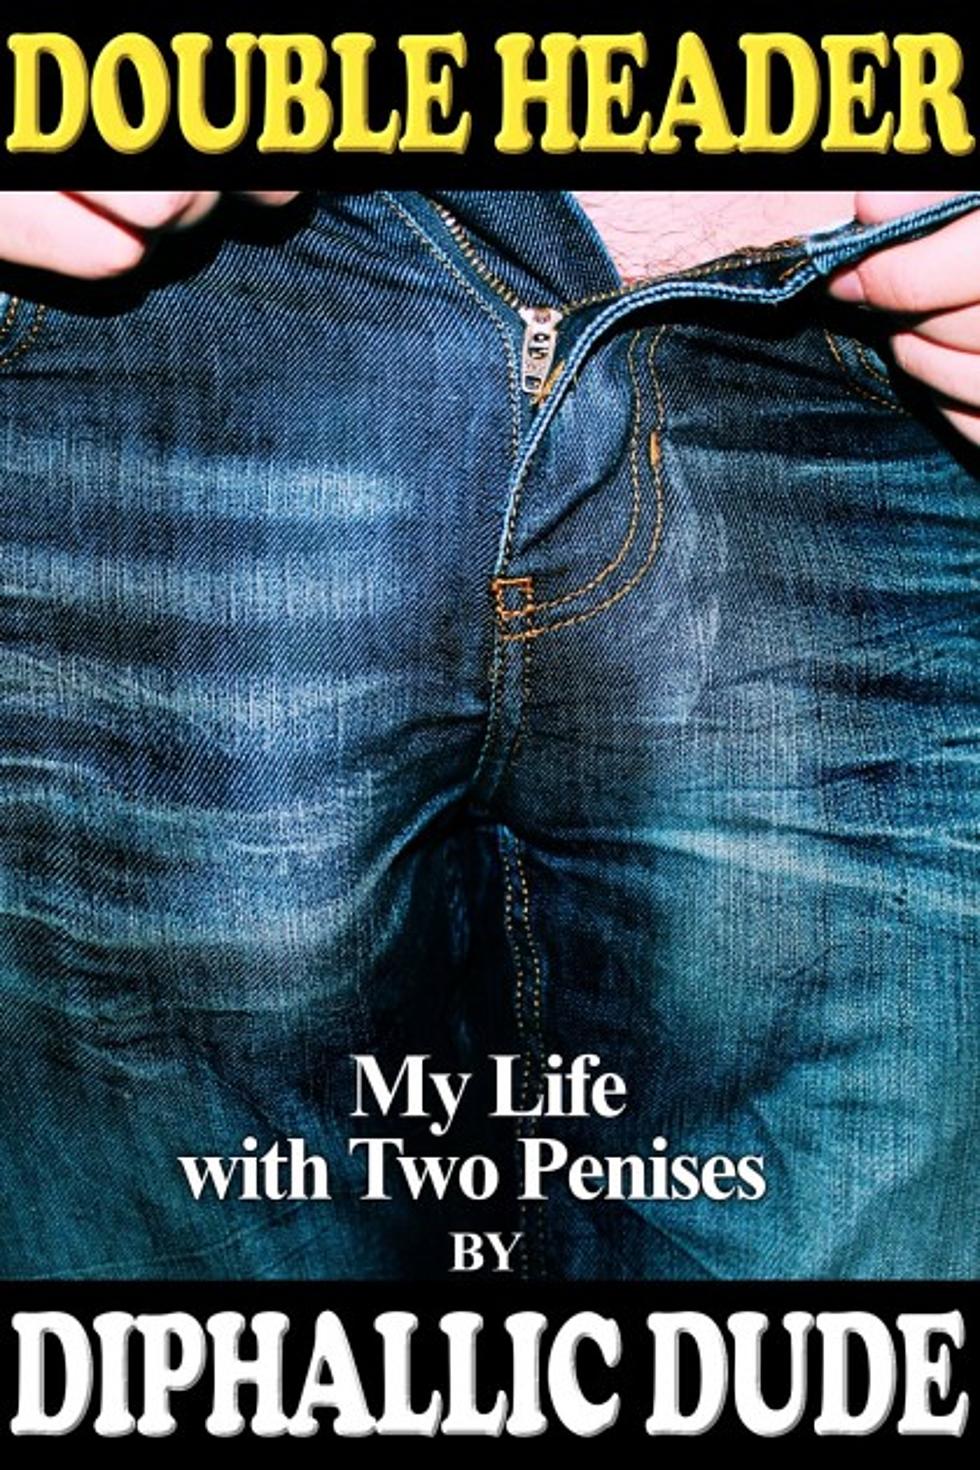 &#8216;DoubleD**kDude&#8217; Writes Book Describing Life With 2 Penises